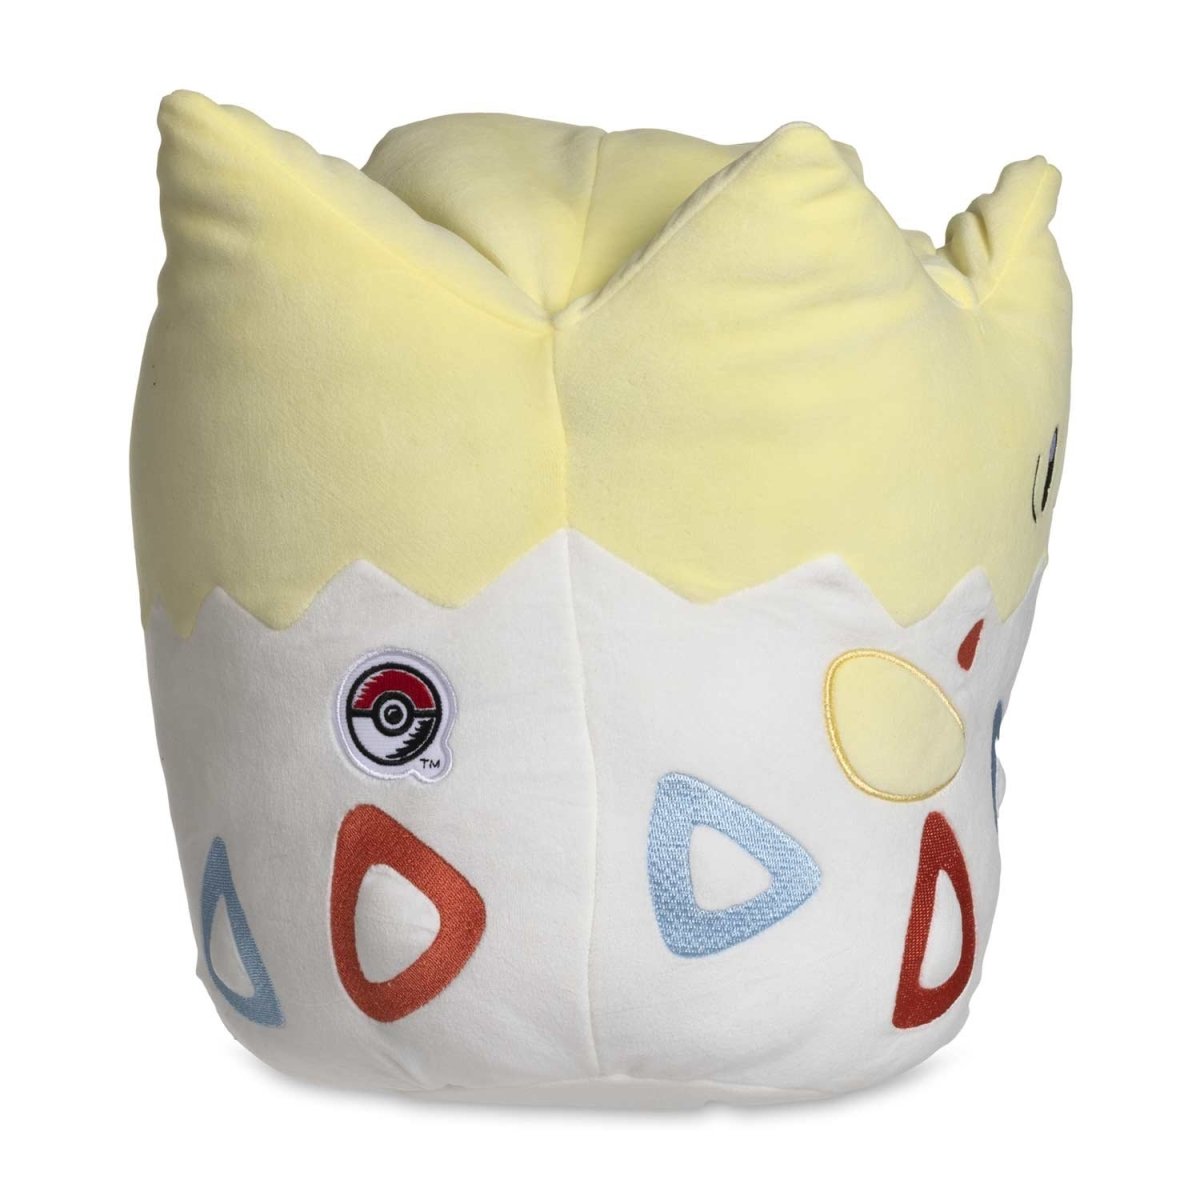 Squishmallows Official Kellytoys Plush 12 Inch Togipe the Egg Pokemon  Squishmallow Pokemon Center Exclusive Embroidery Ultimate Soft Stuffed Toy